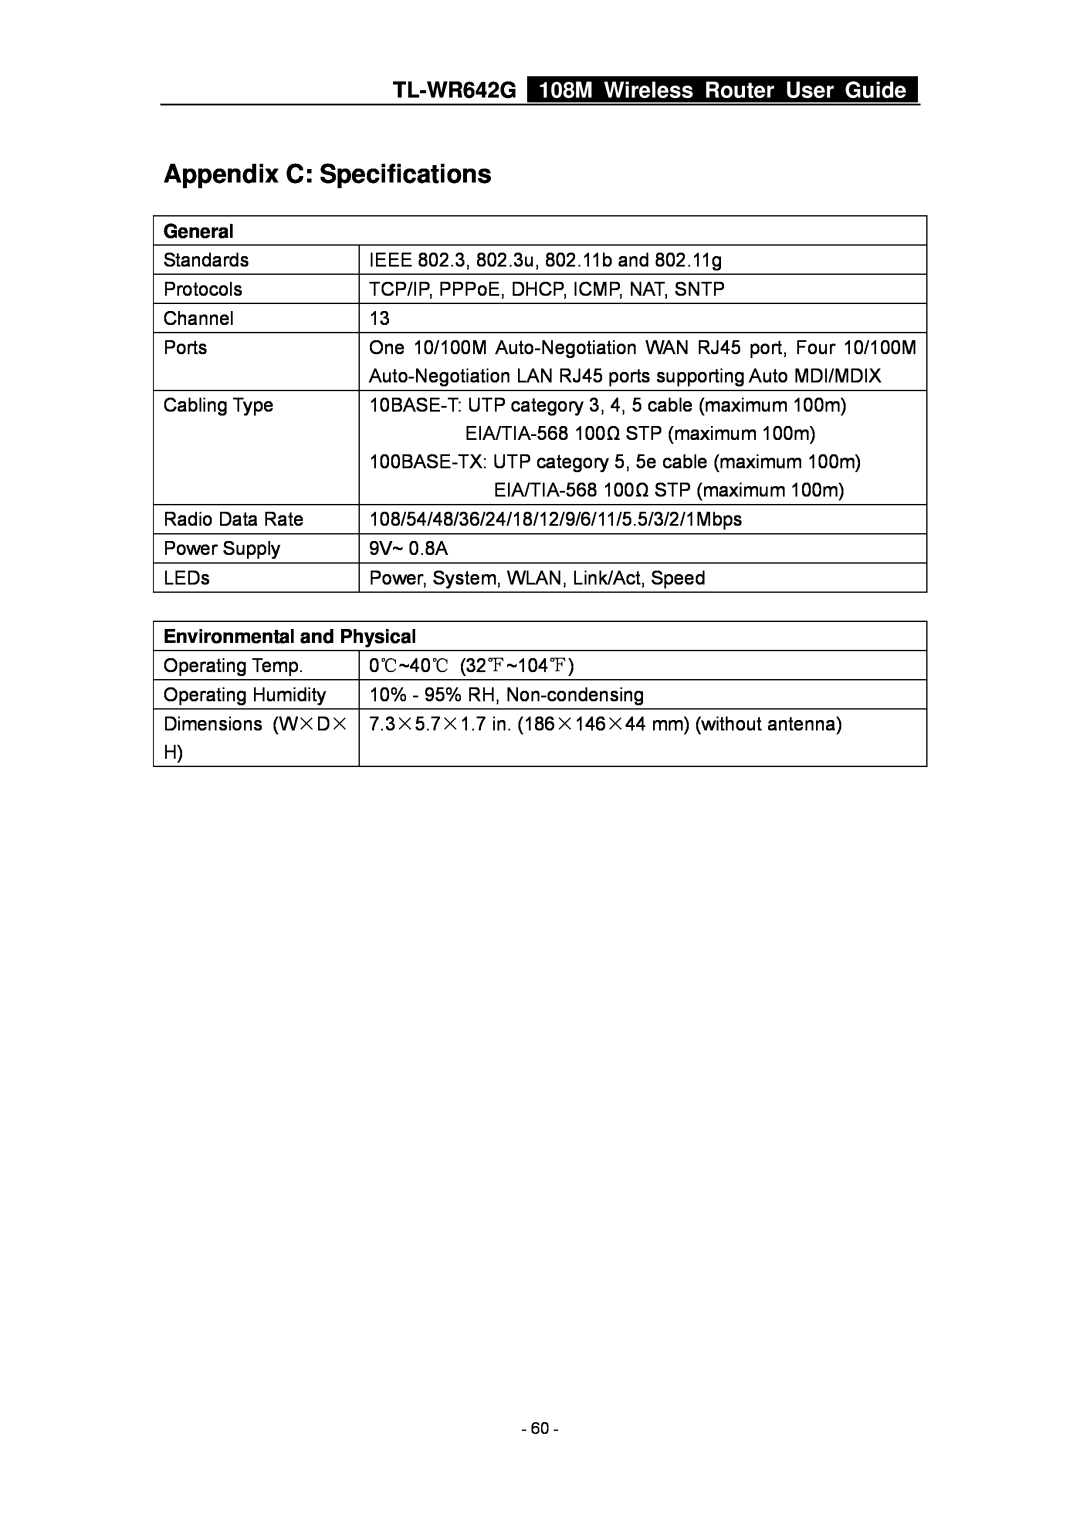 TP-Link TL-WR642G manual Appendix C Specifications, General, Environmental and Physical, 108M Wireless Router User Guide 